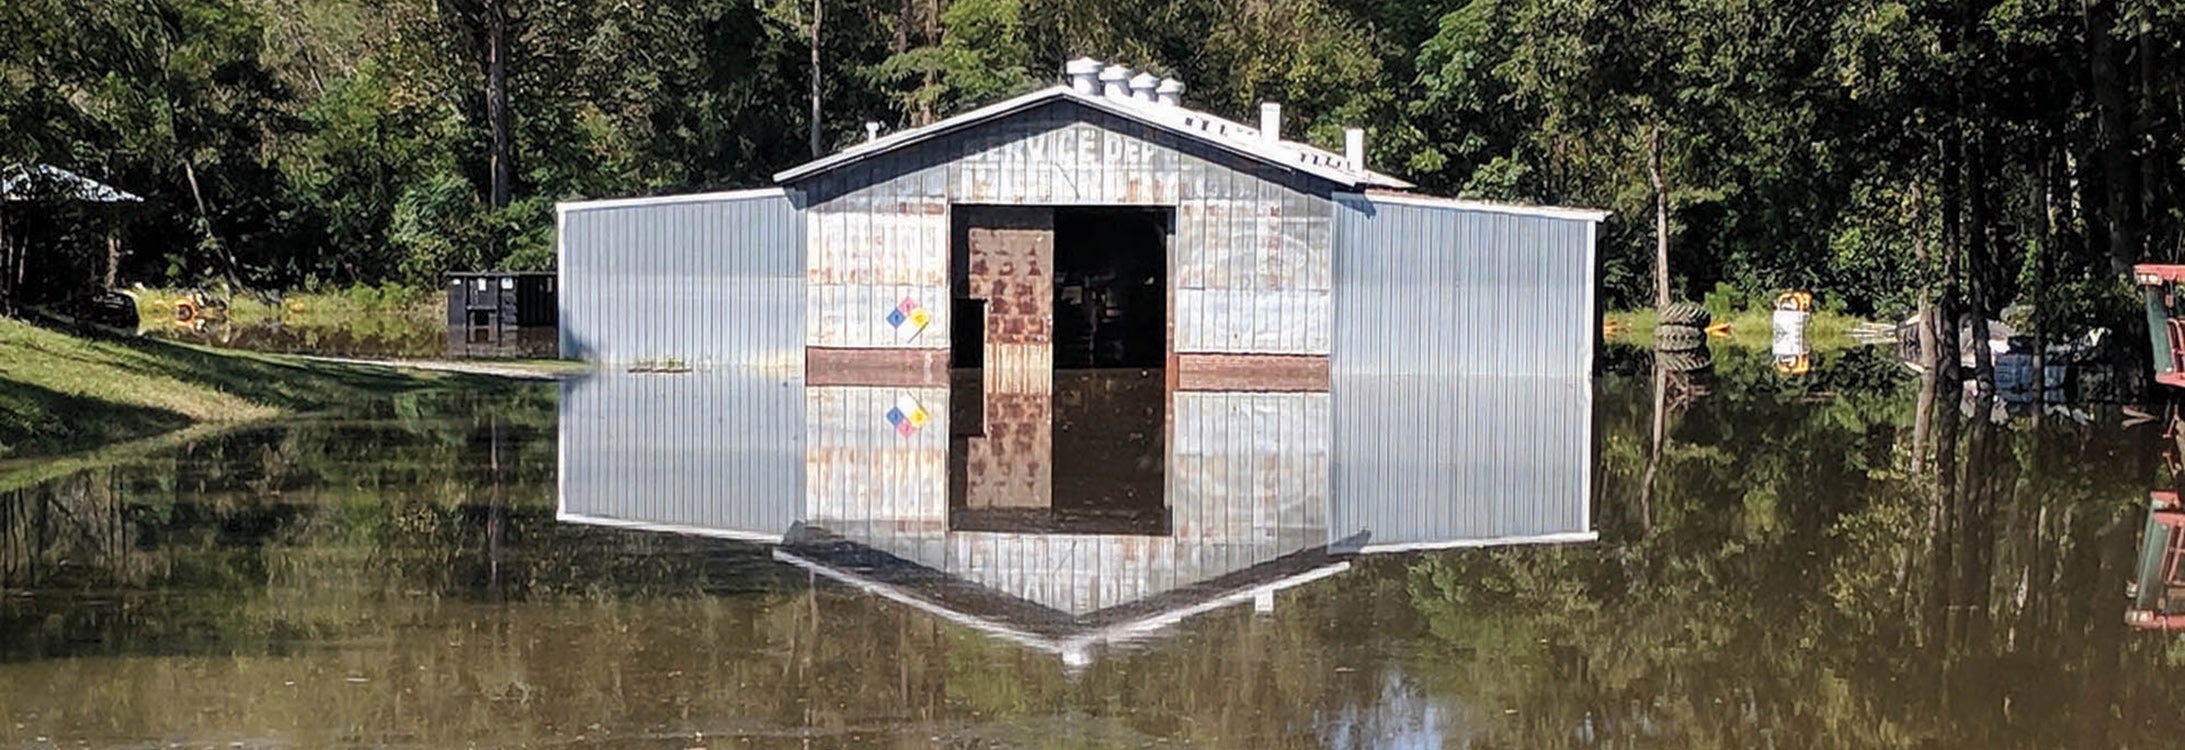 Professor Meghan Millea is leading an ECU team that’s part of a national group studying ways to make communities better able to withstand and recover from hurricanes.
 